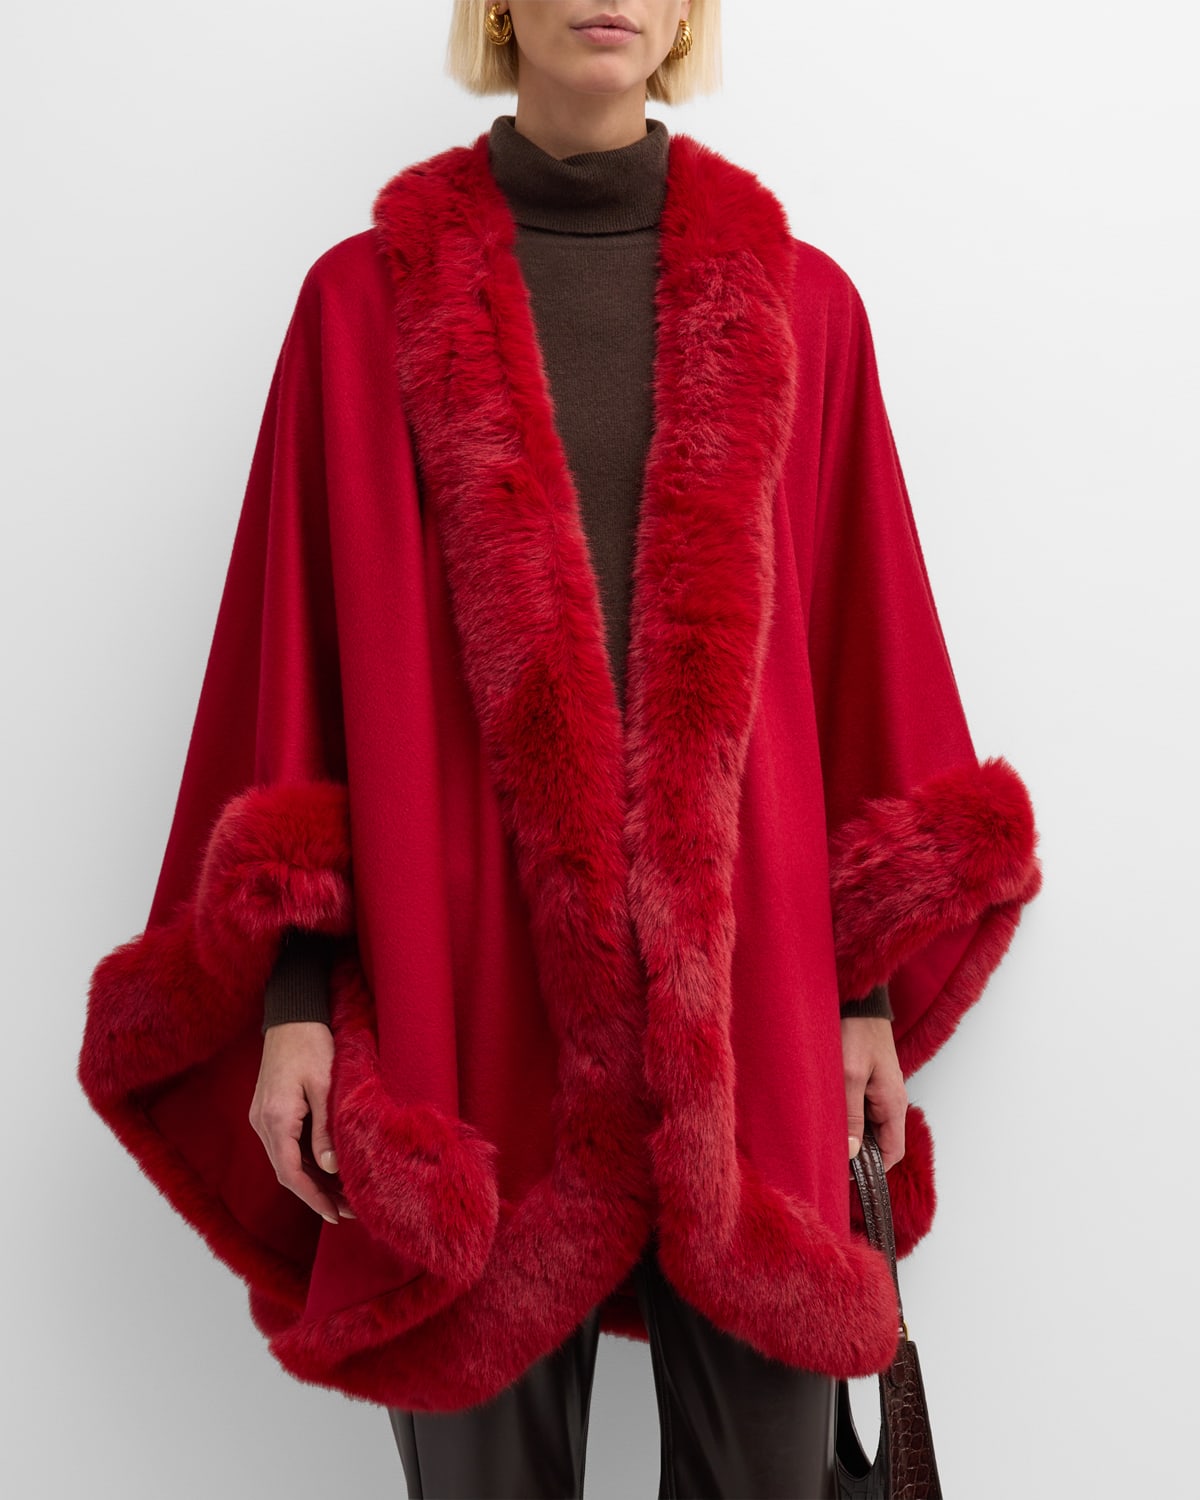 Sofia Cashmere Cashmere Cape With Faux Fur Trim In Deep Red